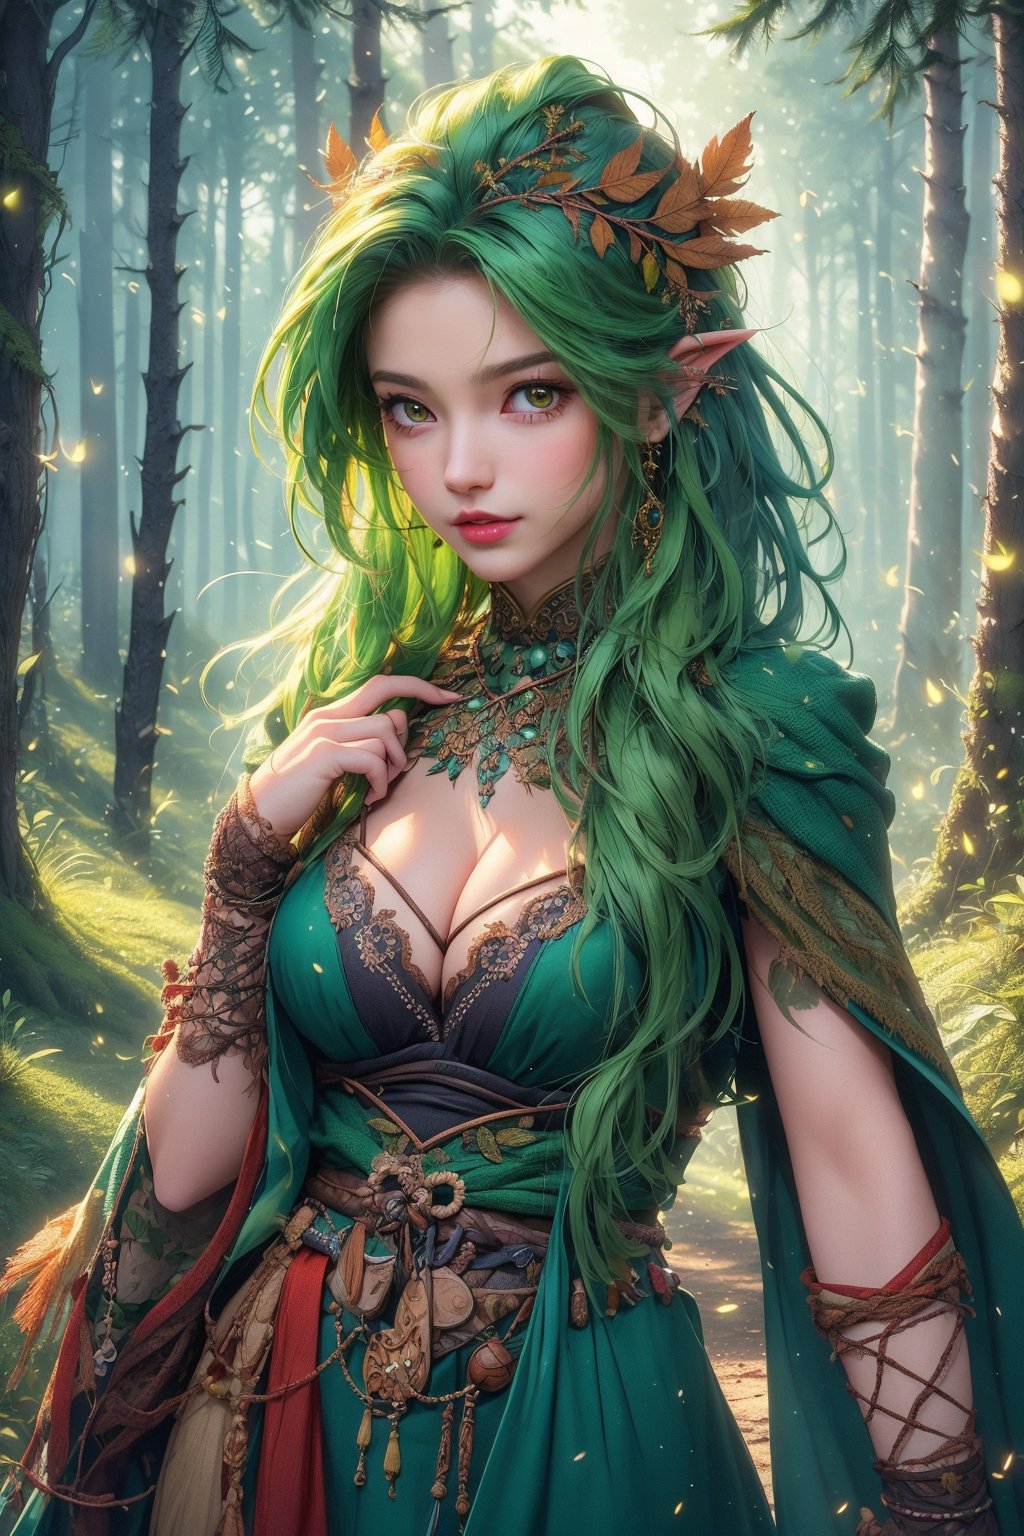 busty and sexy girl, 8k, masterpiece, ultra-realistic, best quality, high resolution, high definition, the character should be a mischievous forest spirit, ((glowing green eyes)), leaves woven into their hair. The background should be a moonlit forest clearing, with fireflies dancing in the air. The overall mood should be mysterious and enchanting, inviting viewers to explore the hidden magic of the woods.